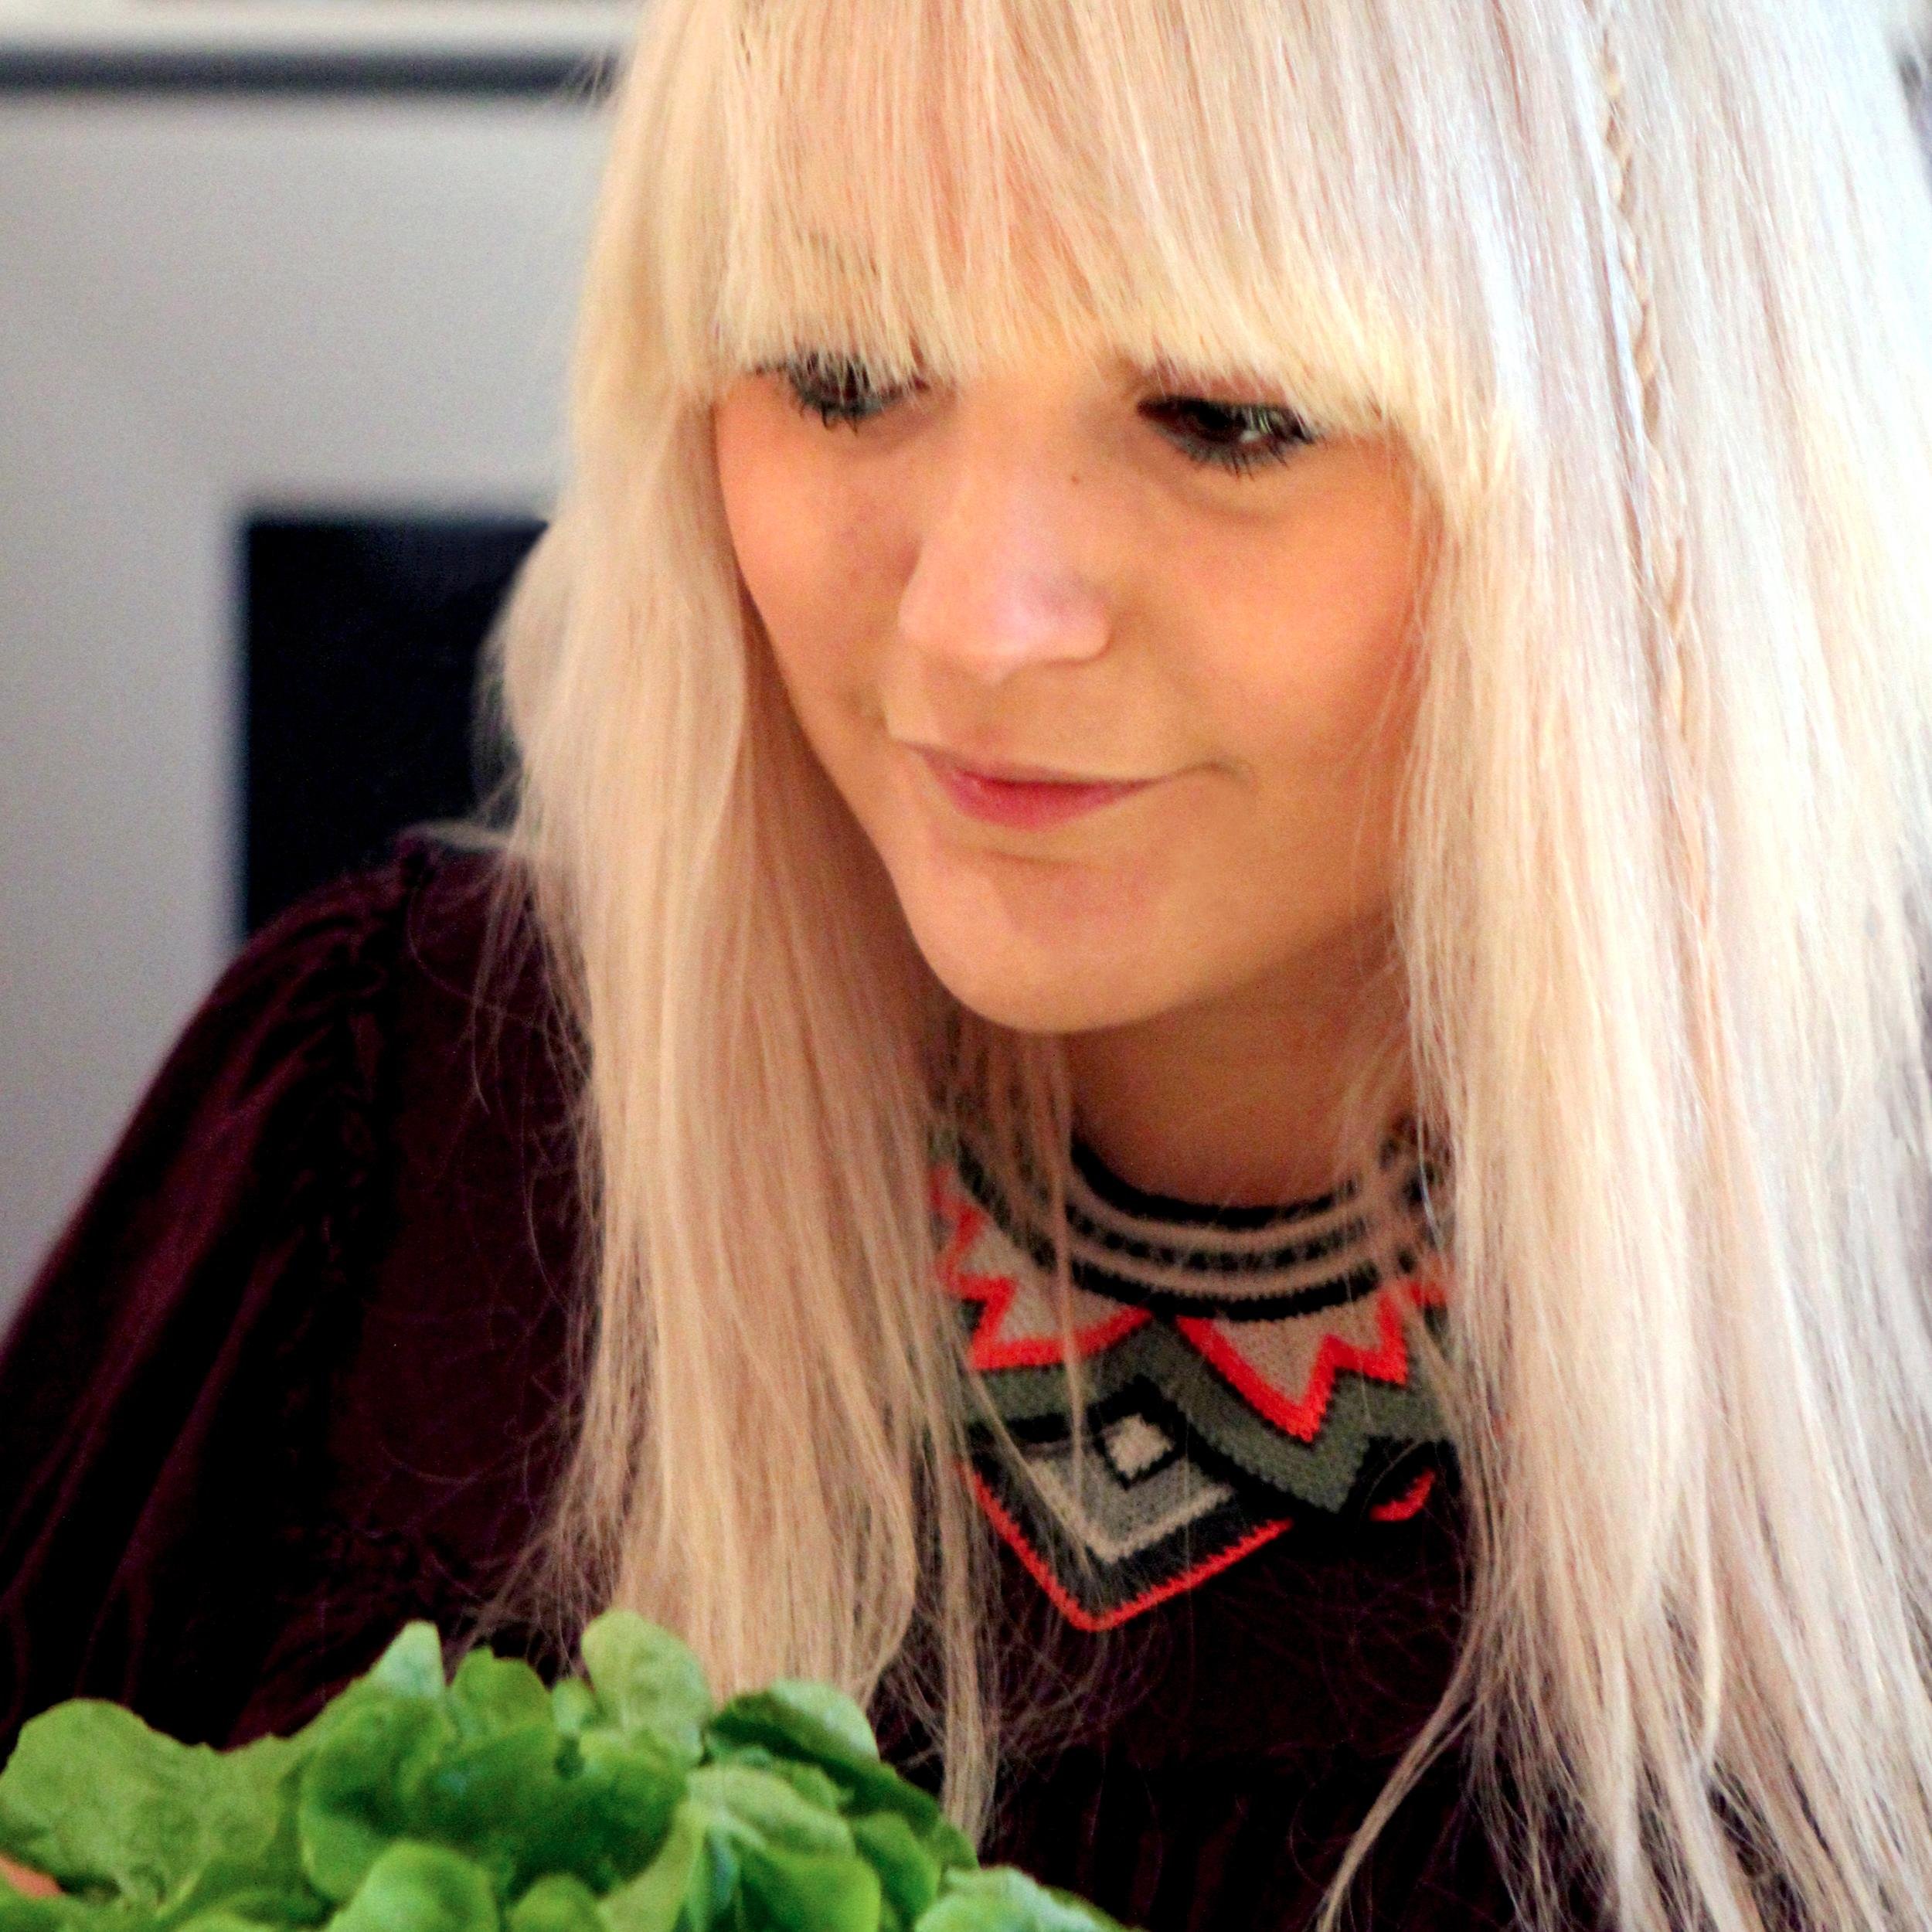 Nutritionista & blogger on a #plantbased mission to inspire & educate on nutrition, diet, health and more...

http://t.co/WD8CeQOqoR
http://t.co/pBkZlwv3TC